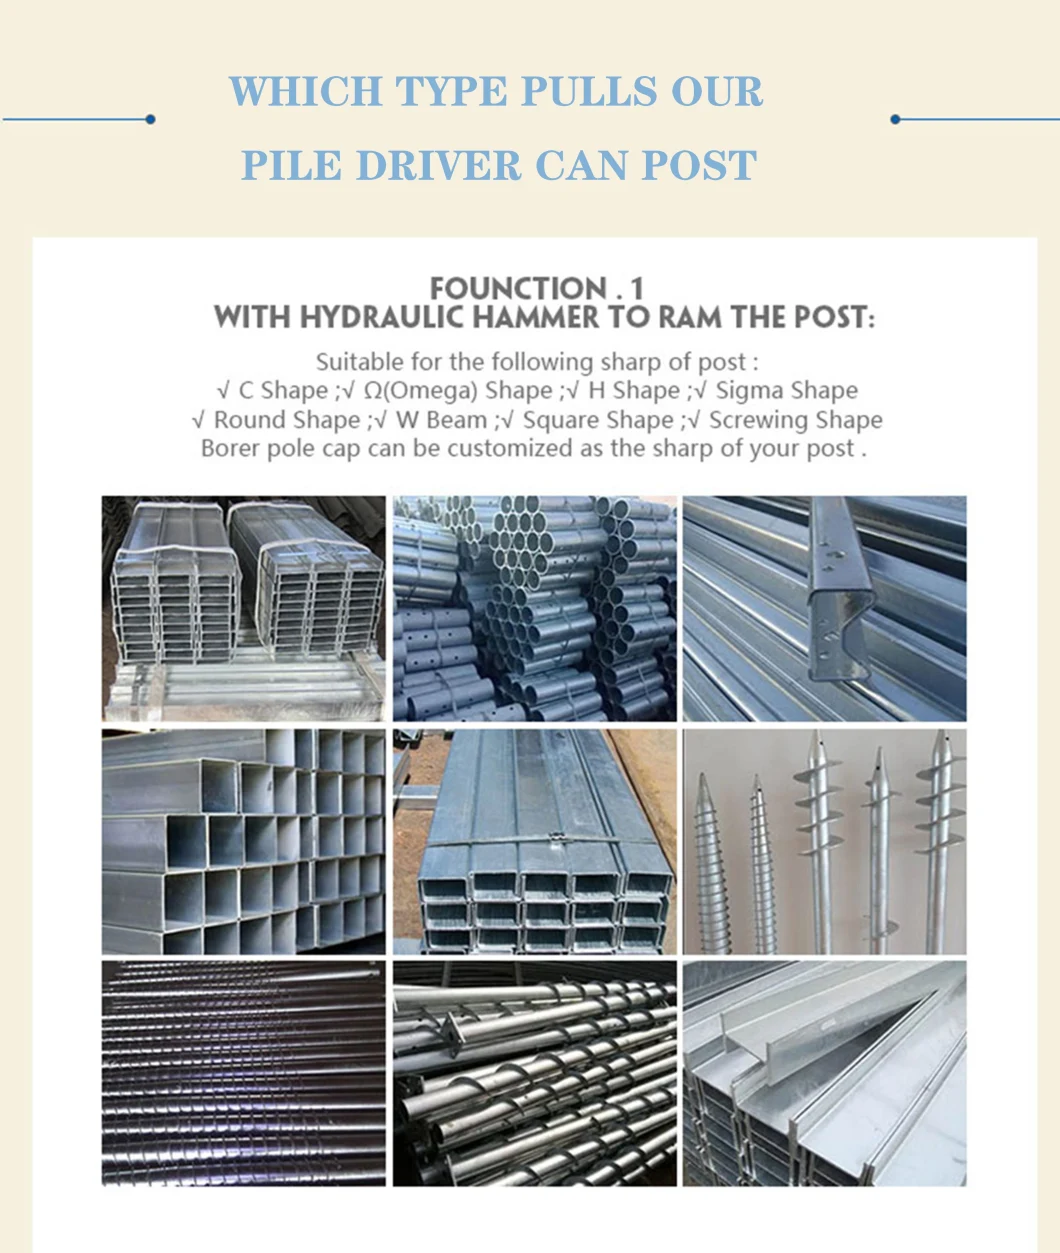 Highway Guardrail Installation Helical Driver Attachment Can Screwing Pilling Pulling Pile